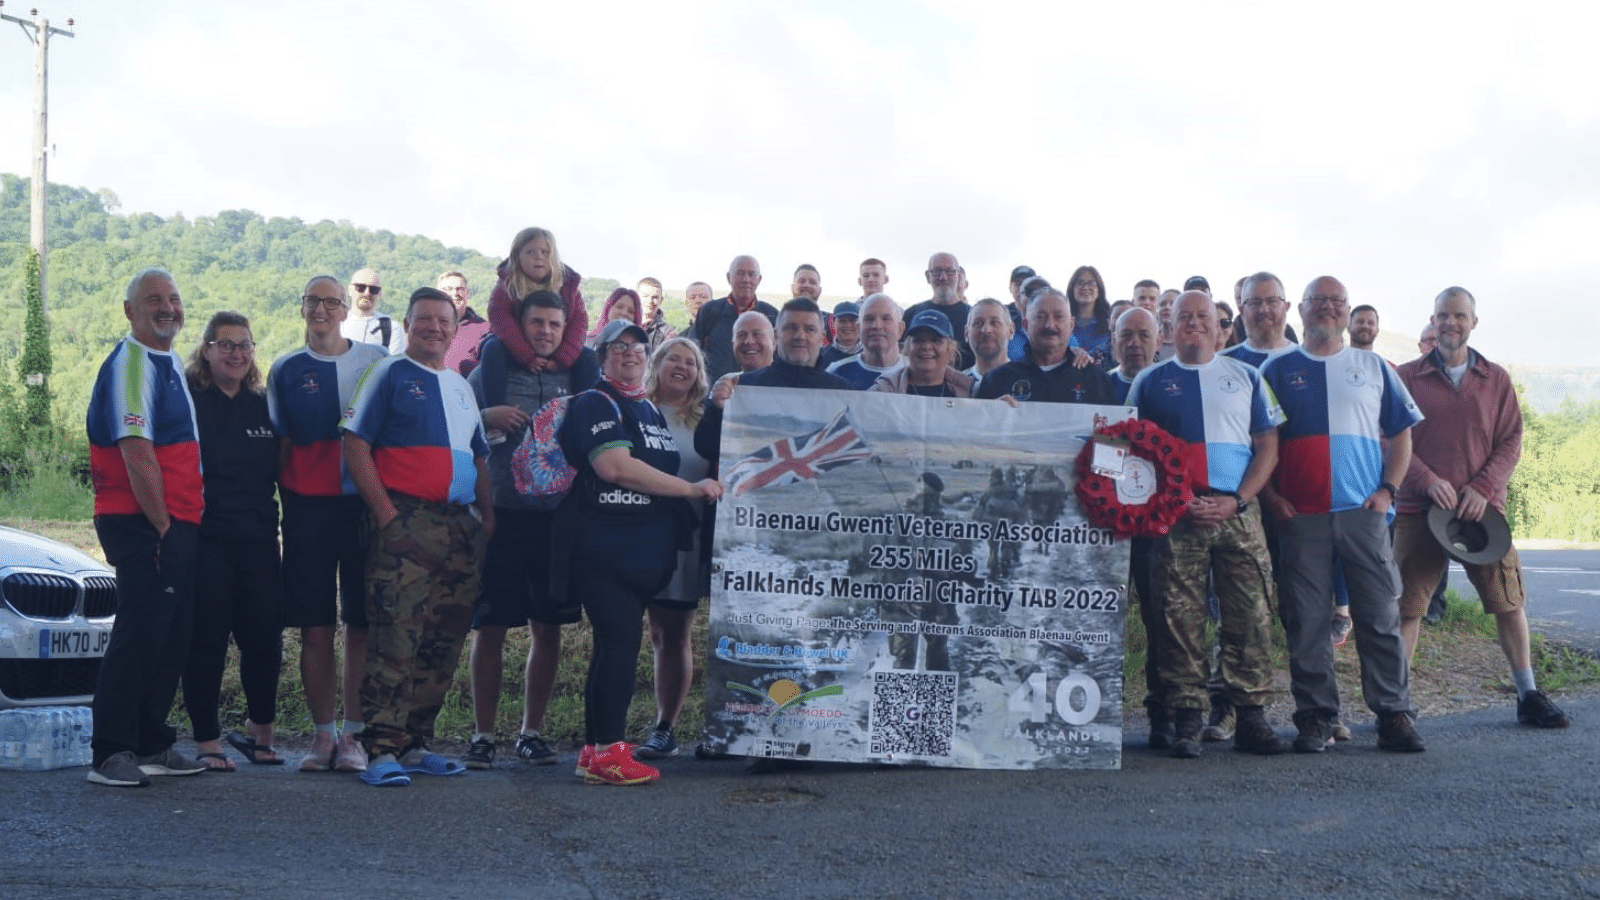 An image of the veterans before taking part in their fundraising walk